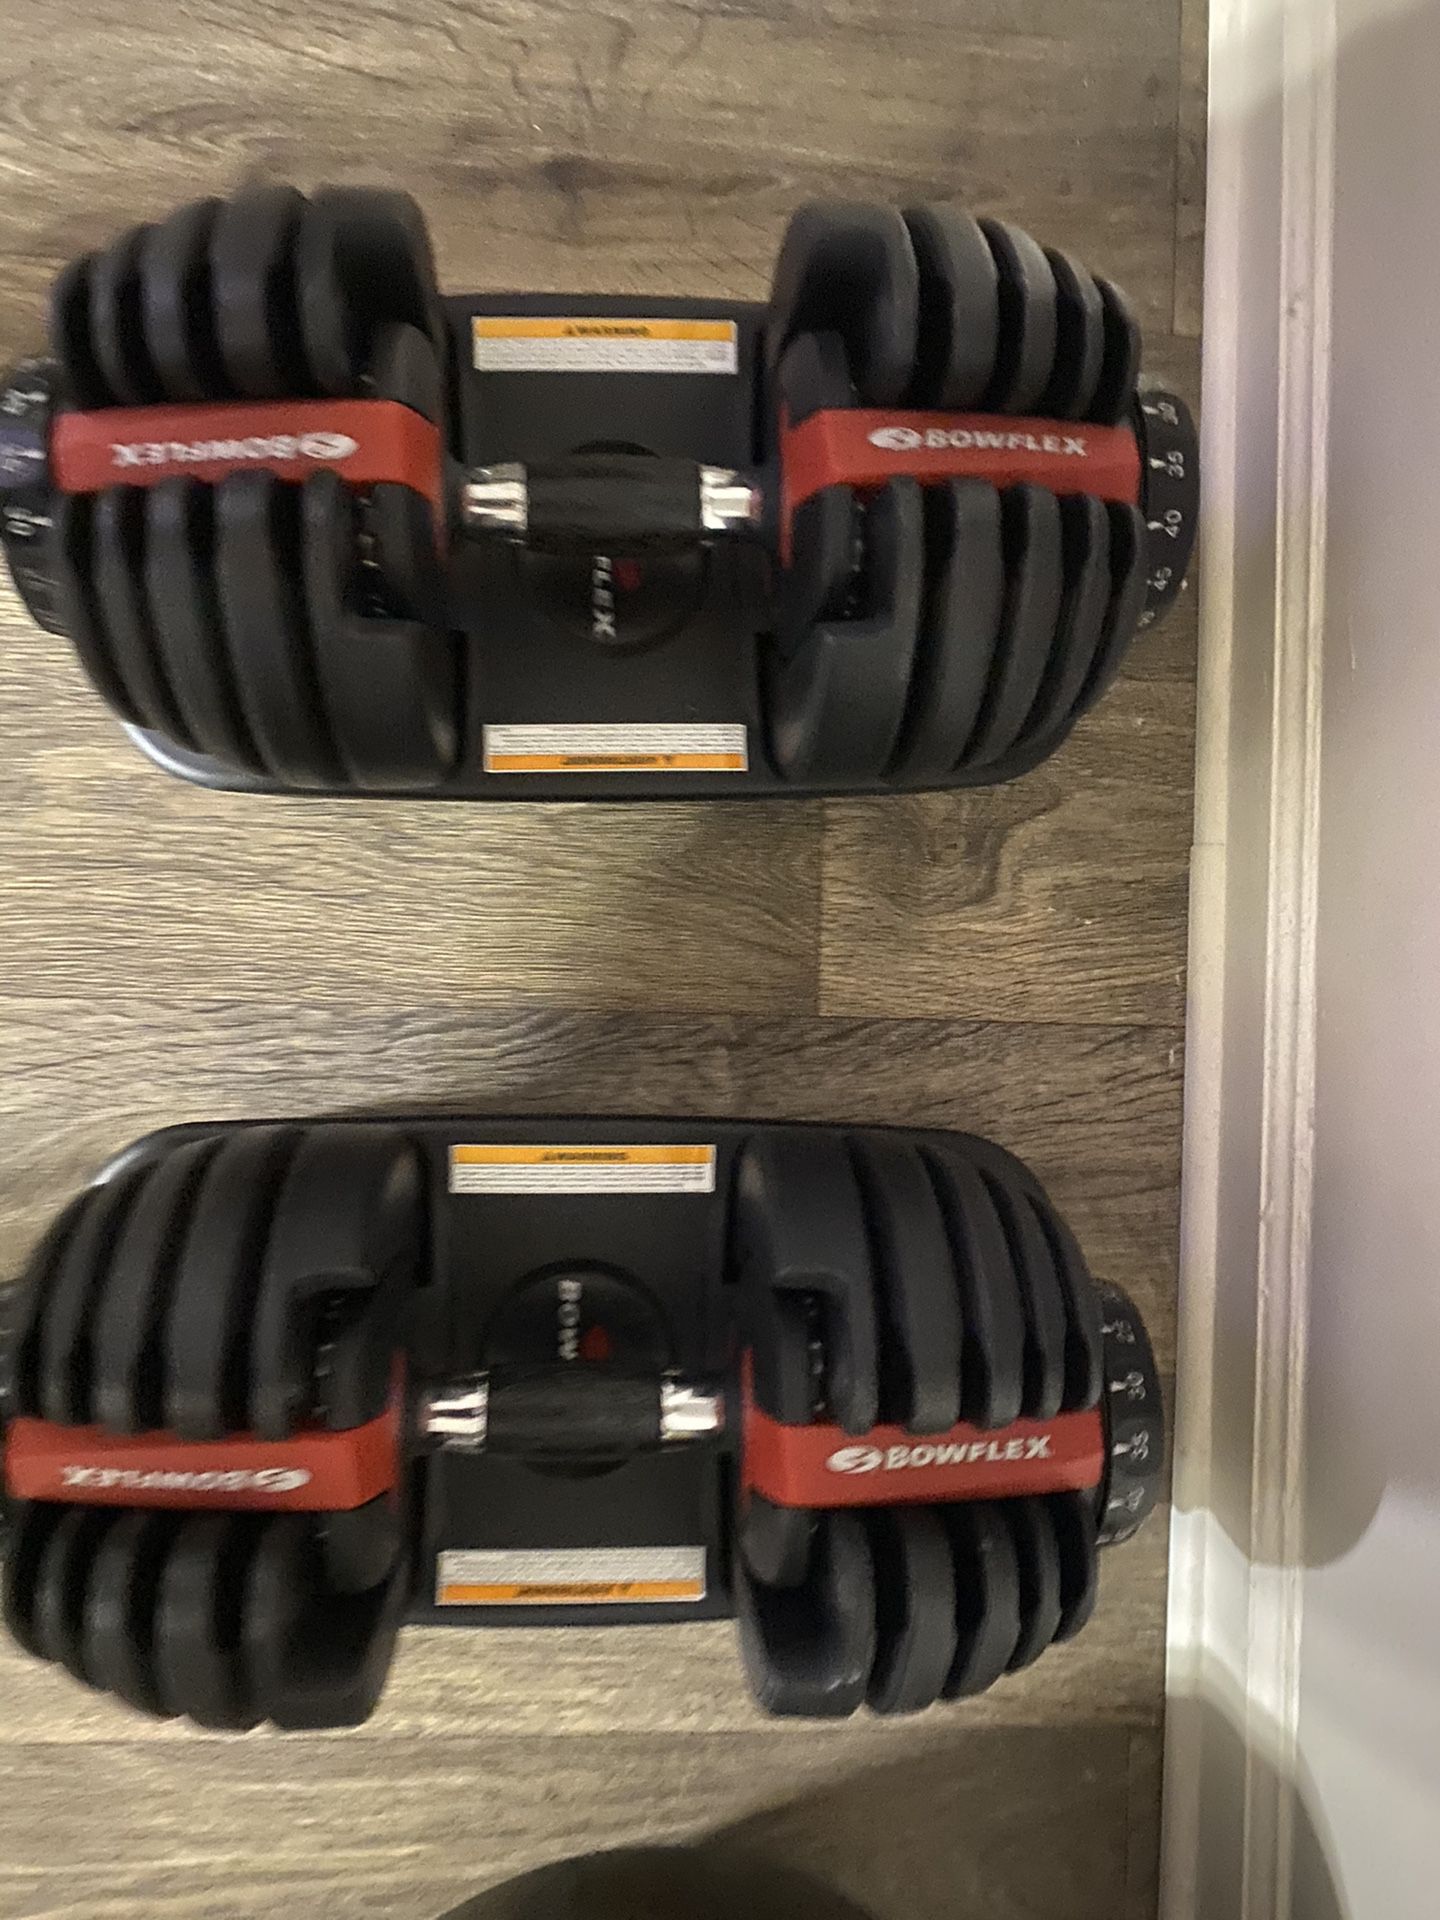 Bowflex Dumbell Perfect Condition